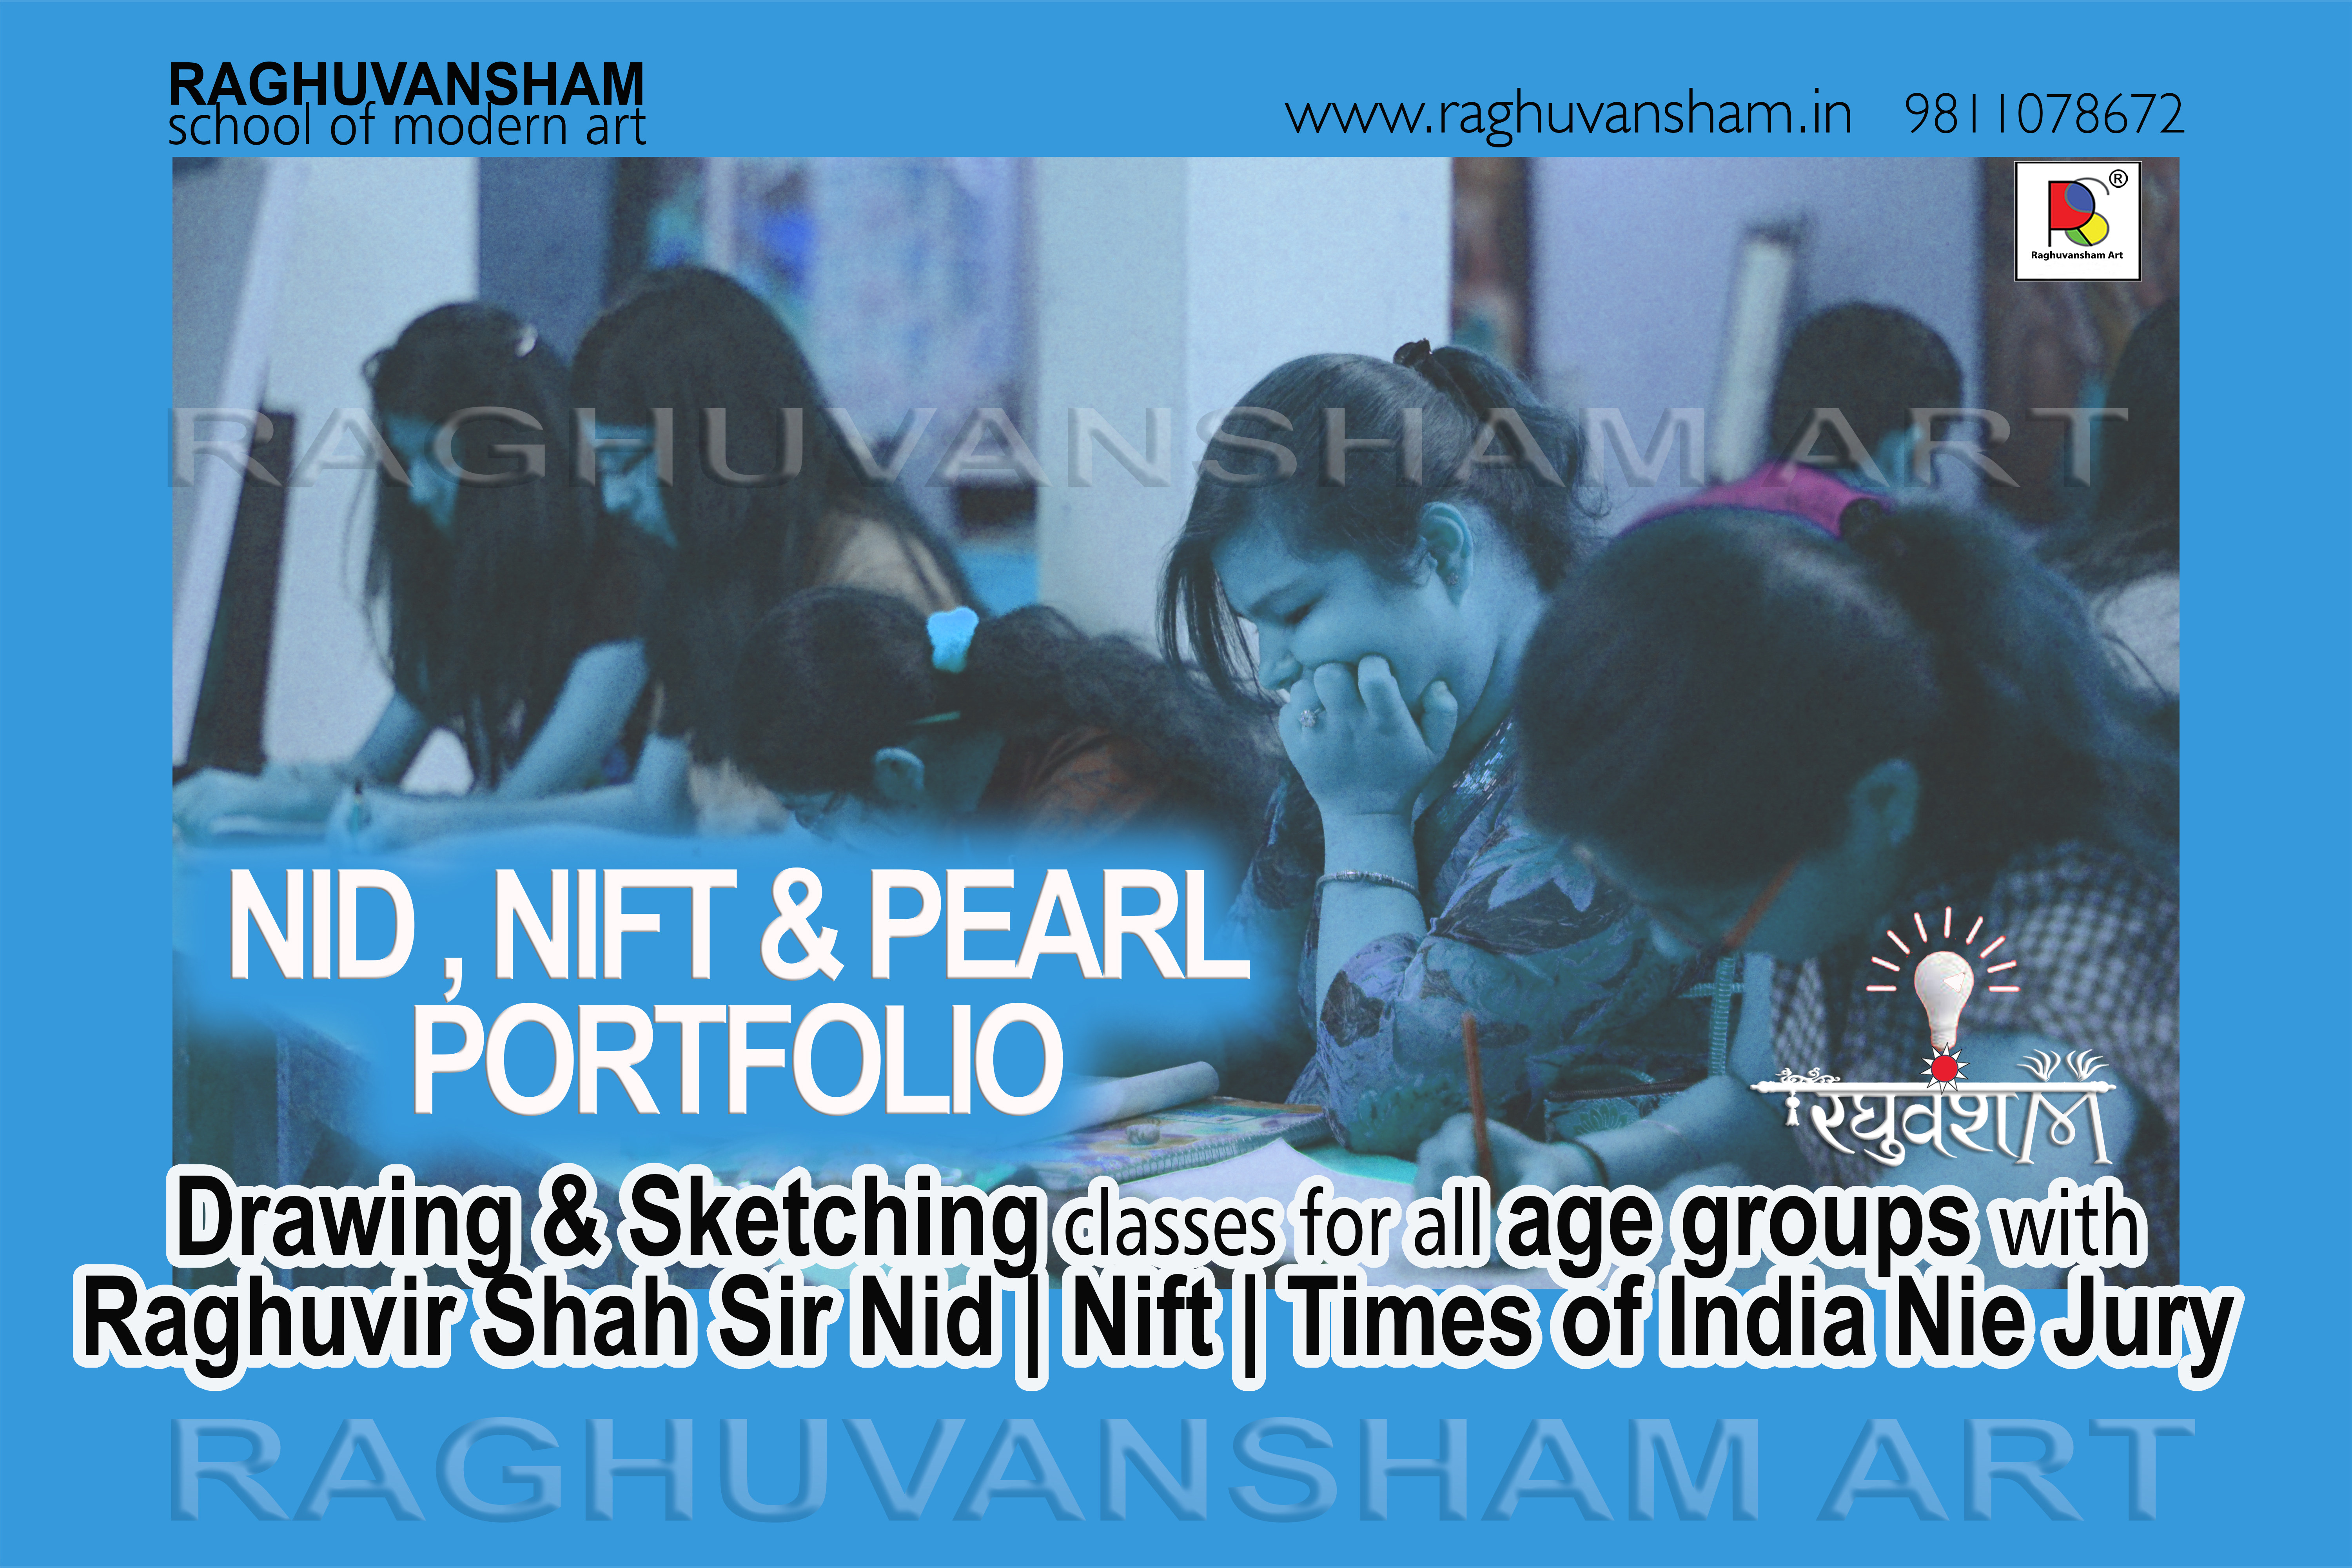 Drawing and sketching classes for all age groups with RAGHUVIR SHAH SIR NIDNIFT Times of india NIE Jury. delhi punjabi baghEducation and LearningProfessional CoursesWest DelhiPunjabi Bagh